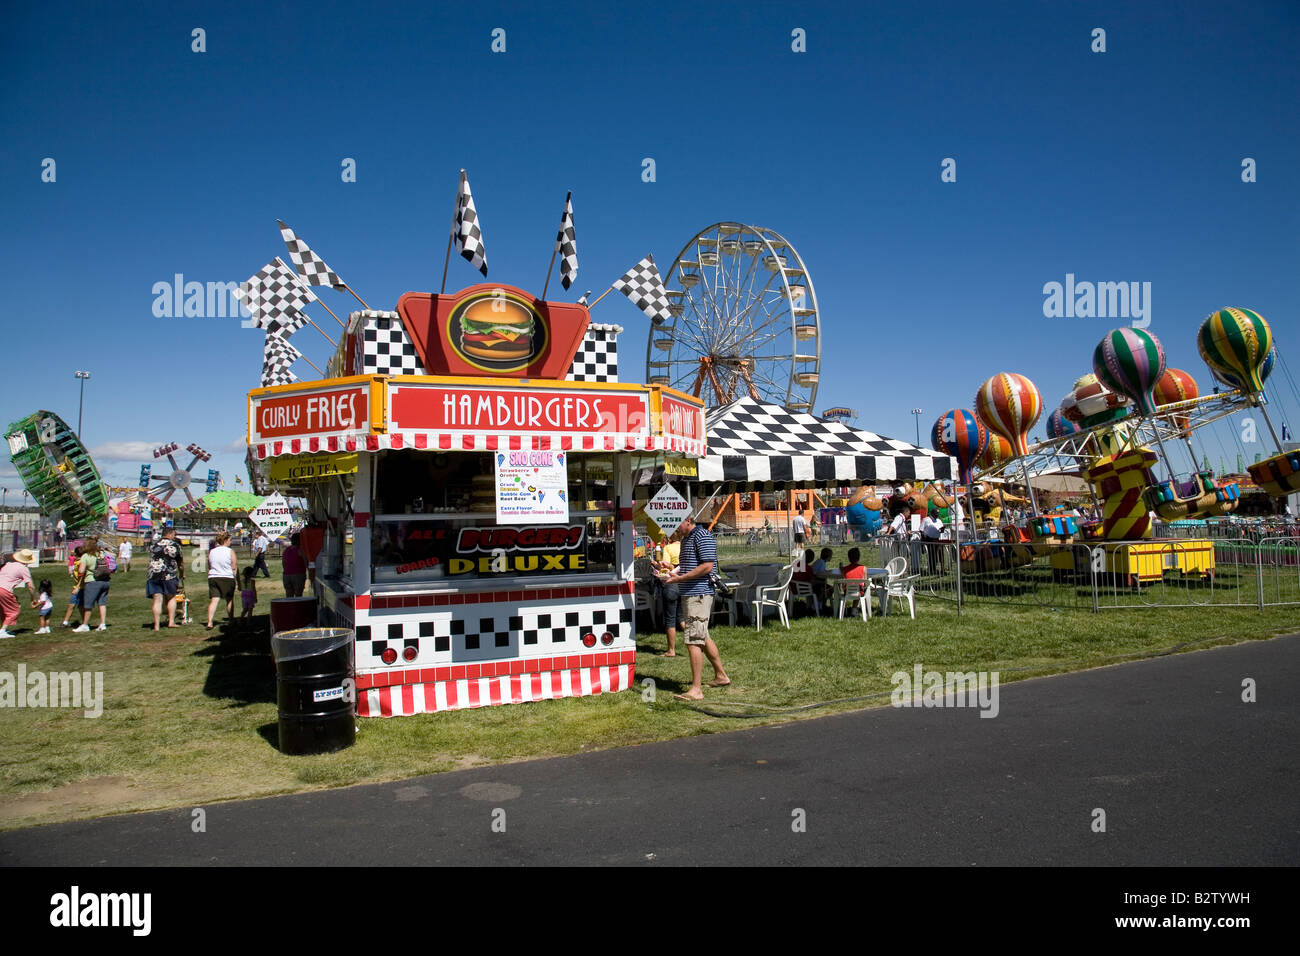 A view of the midway and carnival at the Deschutes County Fair in Redmond Oregon Stock Photo